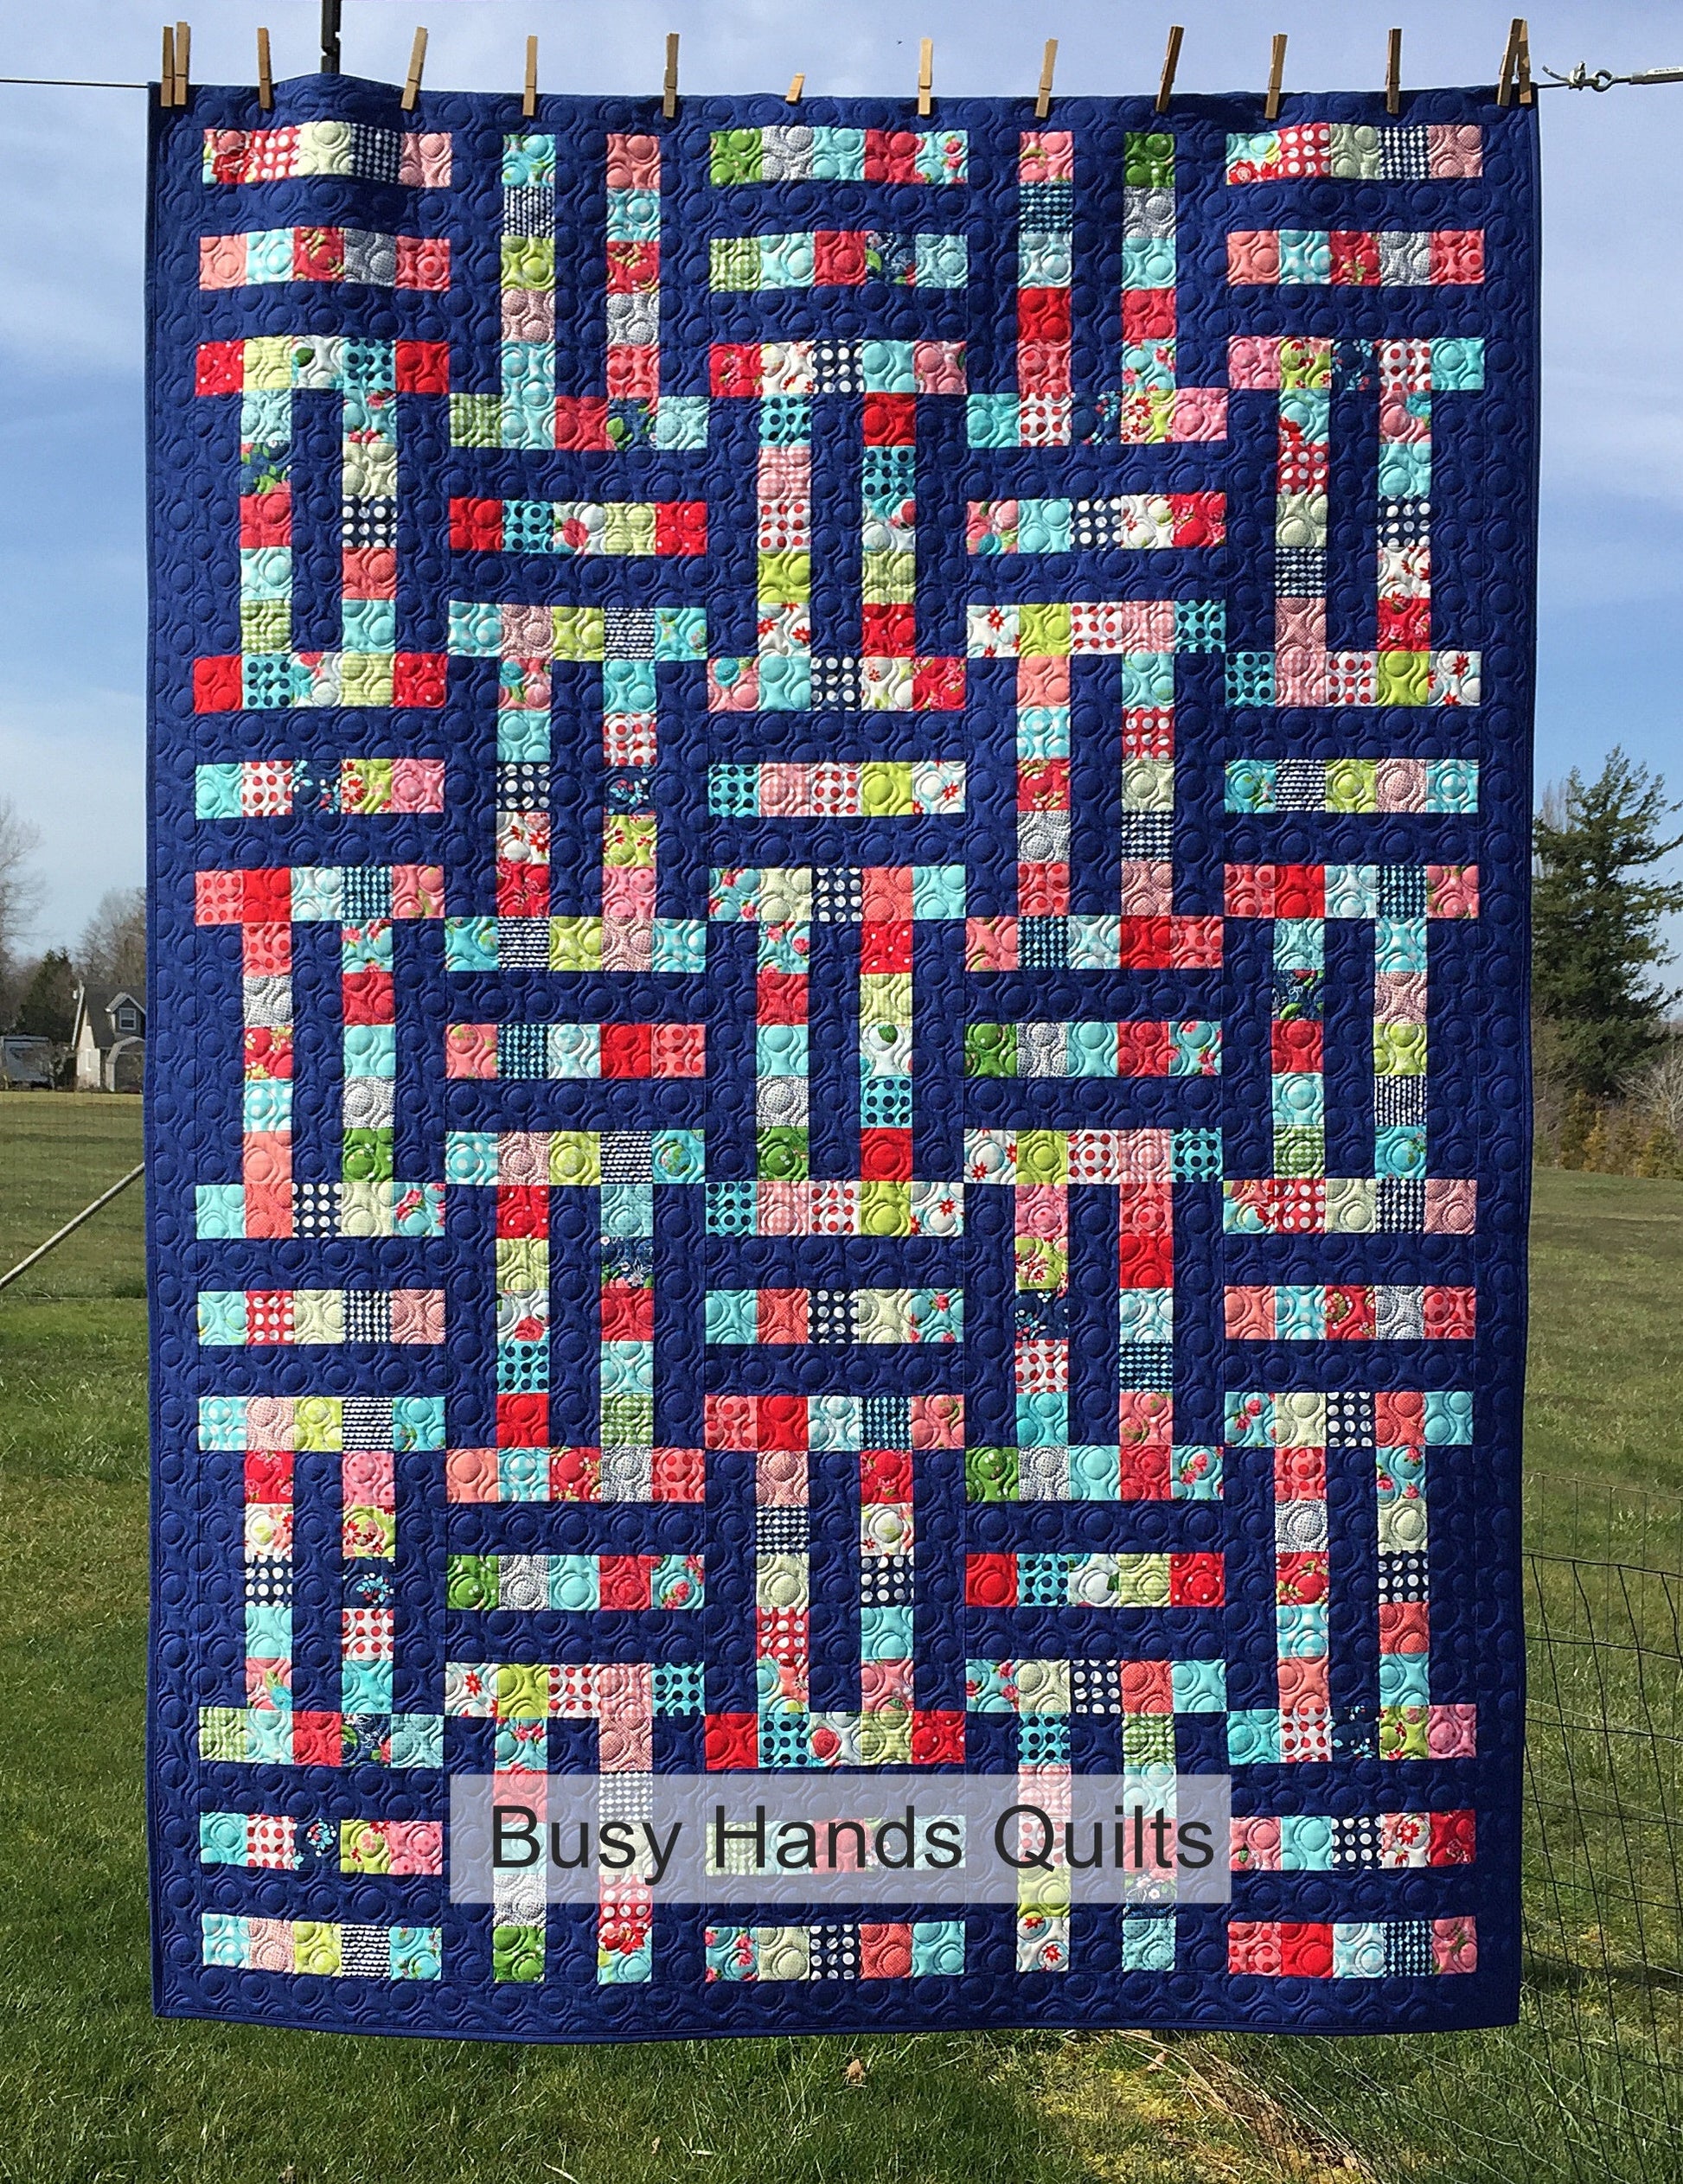 Family Ties Quilt Pattern PRINTED Busy Hands Quilts {$price}